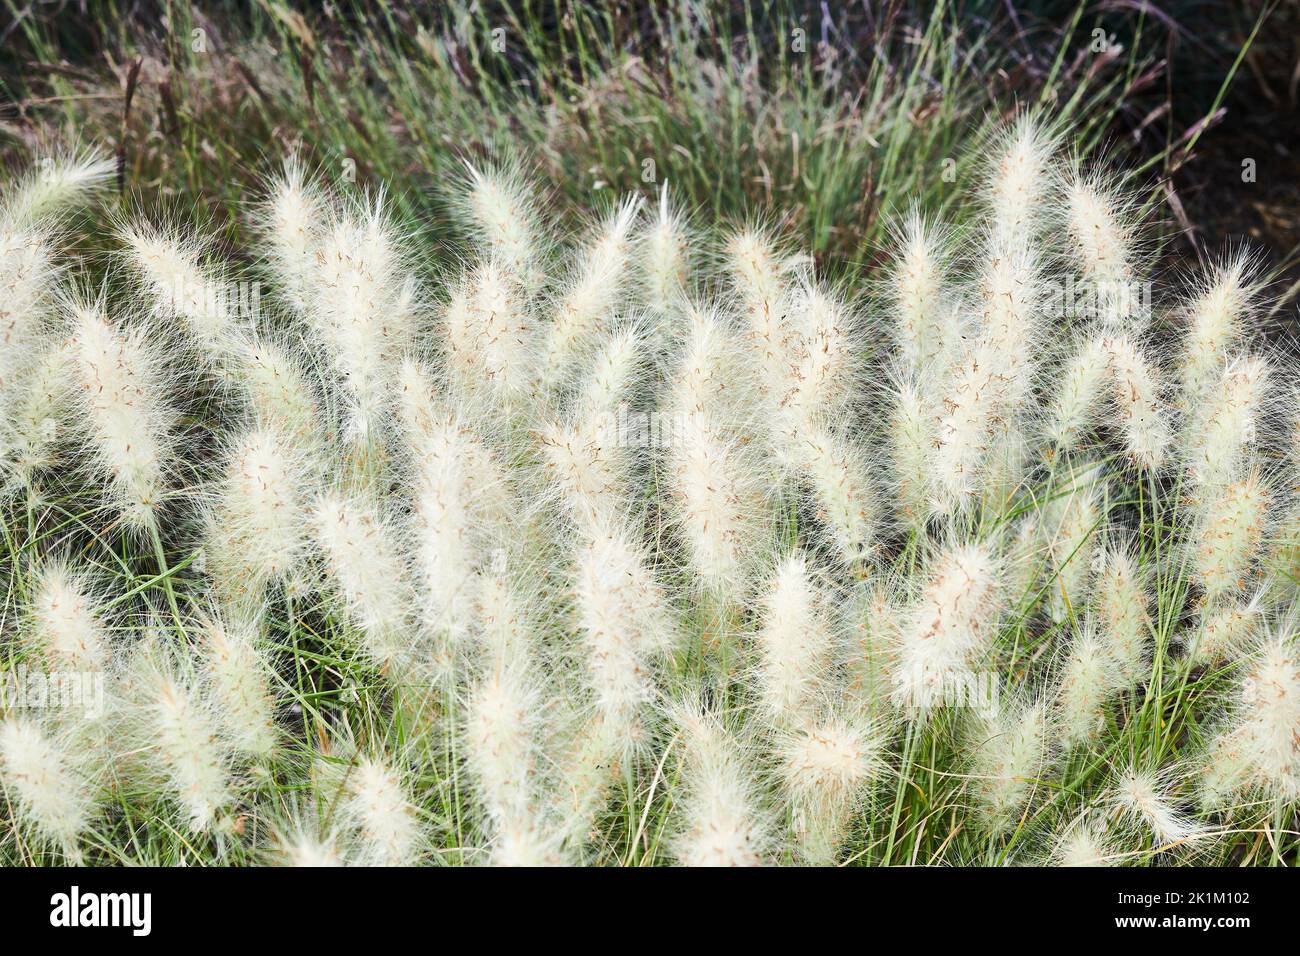 Prickly white flowers of the pennisetum villosum, or feathertop grass of the poaceae family, found in tropical countries. Stock Photo